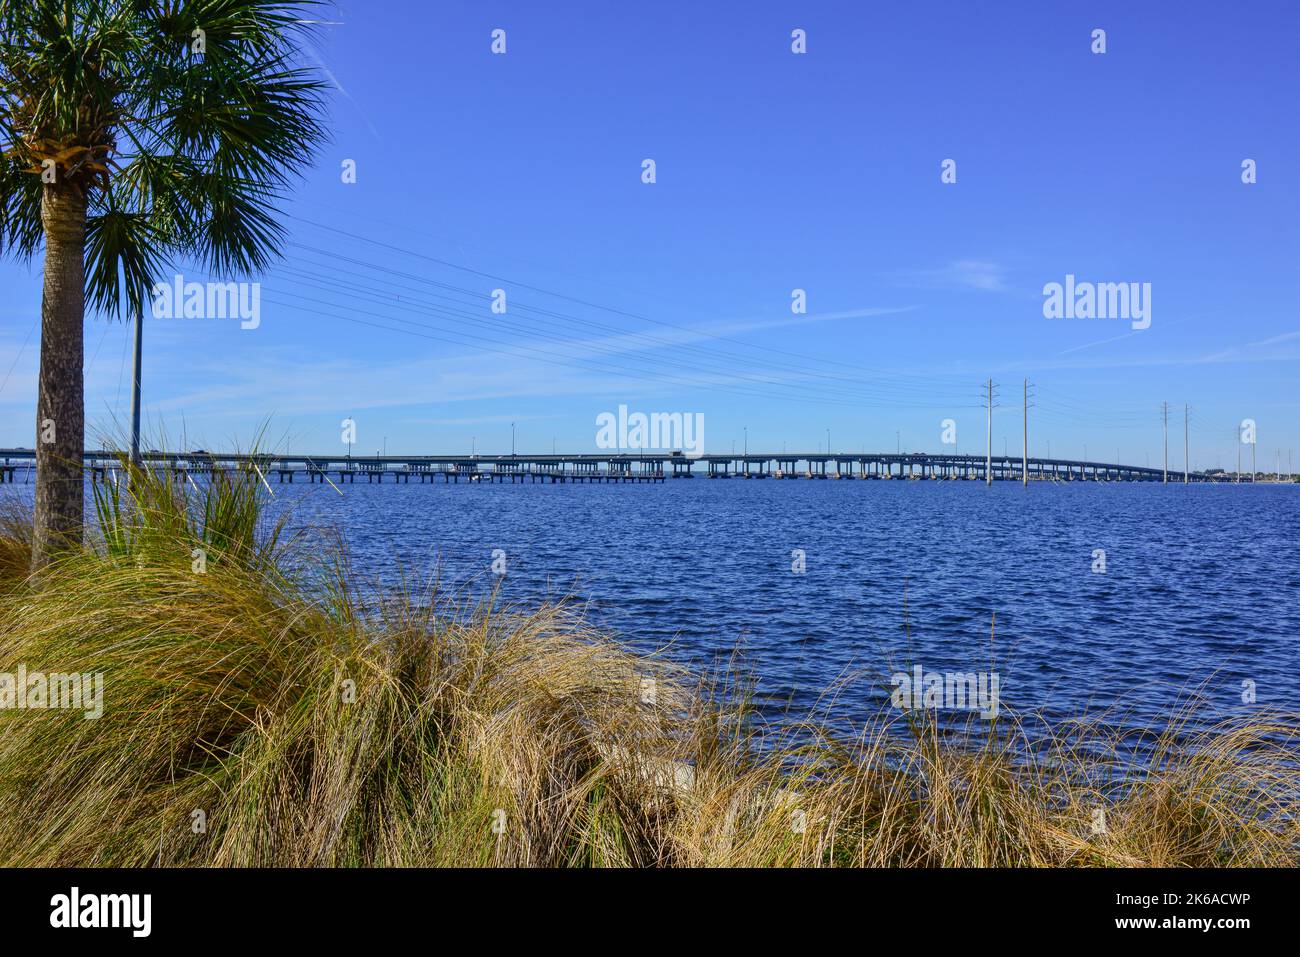 Distant View of the Gilchrist Bridge crossing the Peace River between Port Charlotte and Punta Gorda, Florida framed by palm trees  and wiregrass near Stock Photo